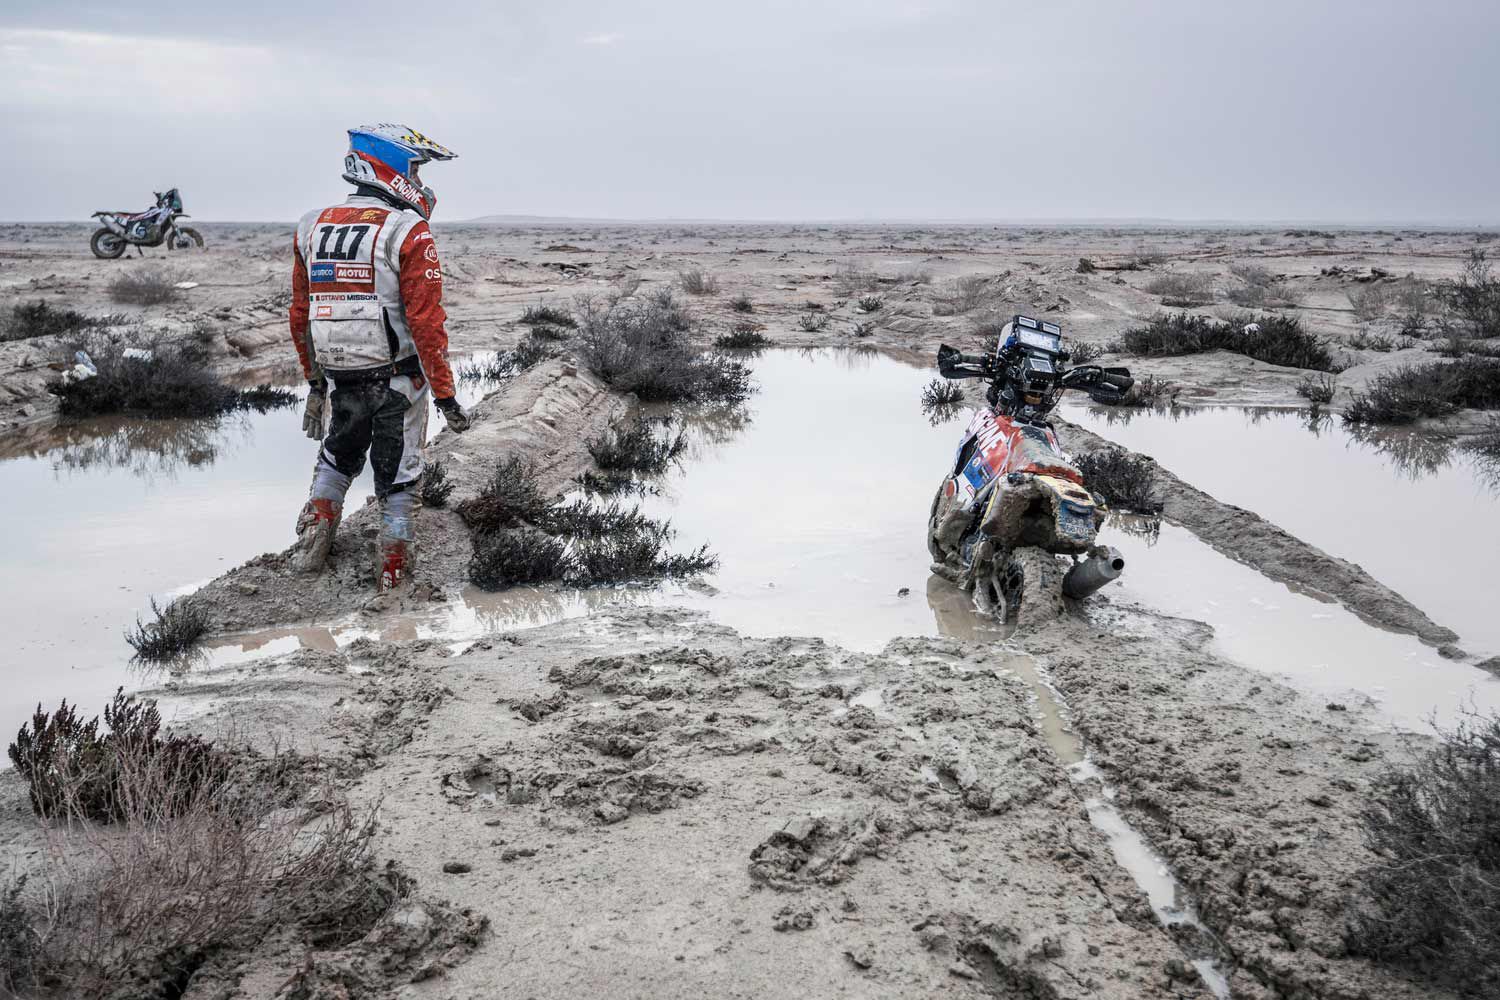 Ottavio Missoni, privateer, takes stock of his mud-bound Honda during the final Stage 14. But he finished. Dream accomplished.